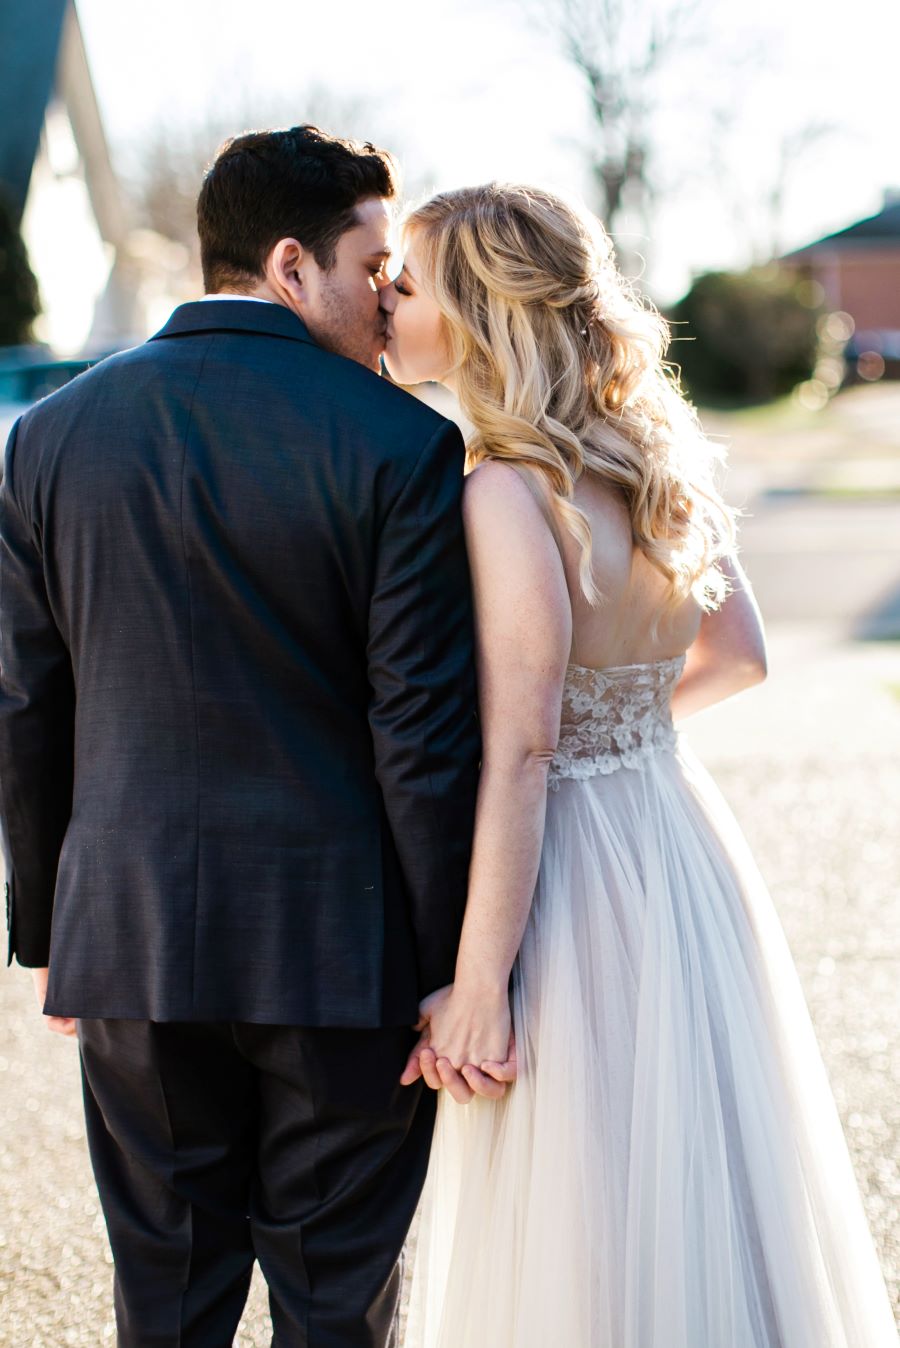 Bride and groom kissing and holding hands in the street/ Elopement / Spring / March / Dusty Rose